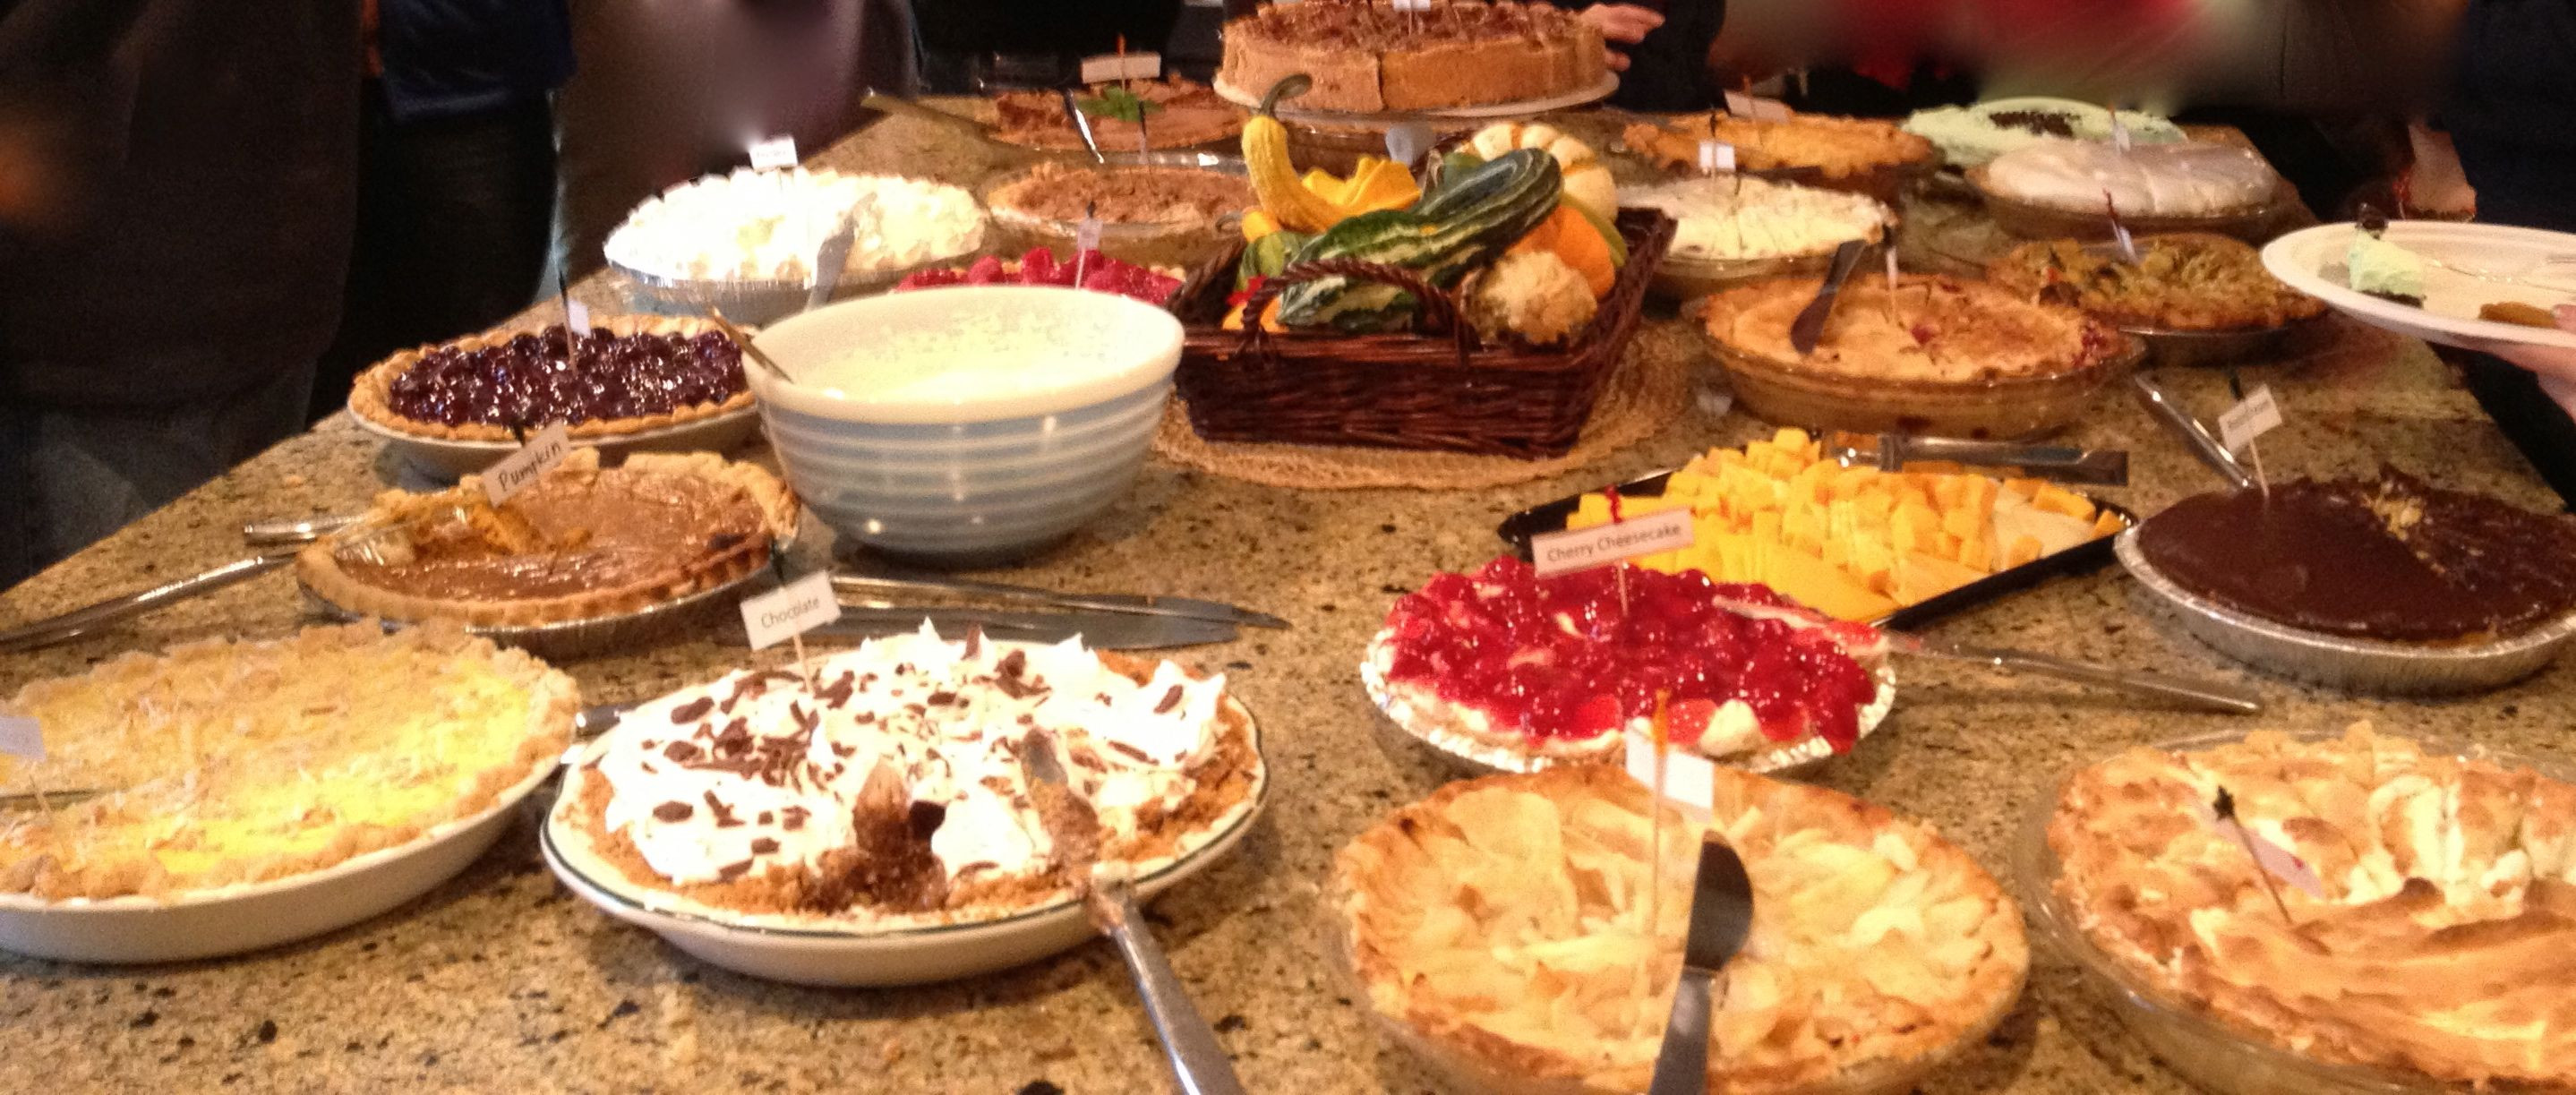 Polly'S Pies Thanksgiving Dinner
 Delicious Numbers